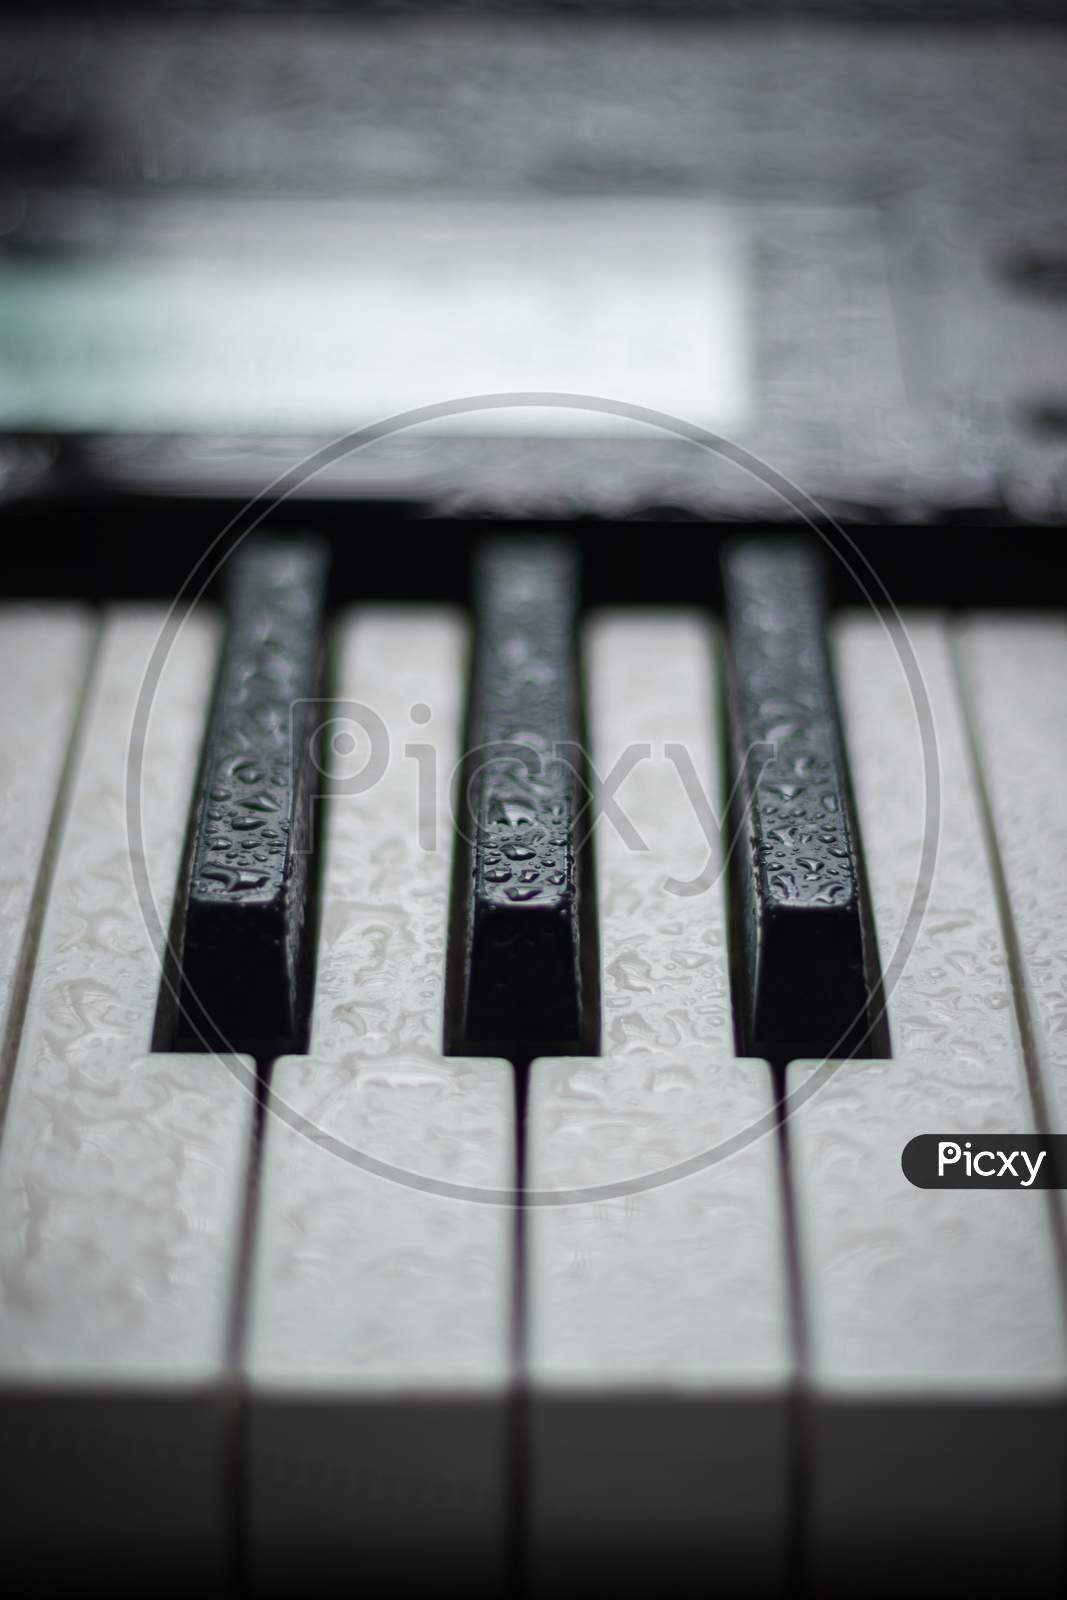 some creative pictures of keyboard